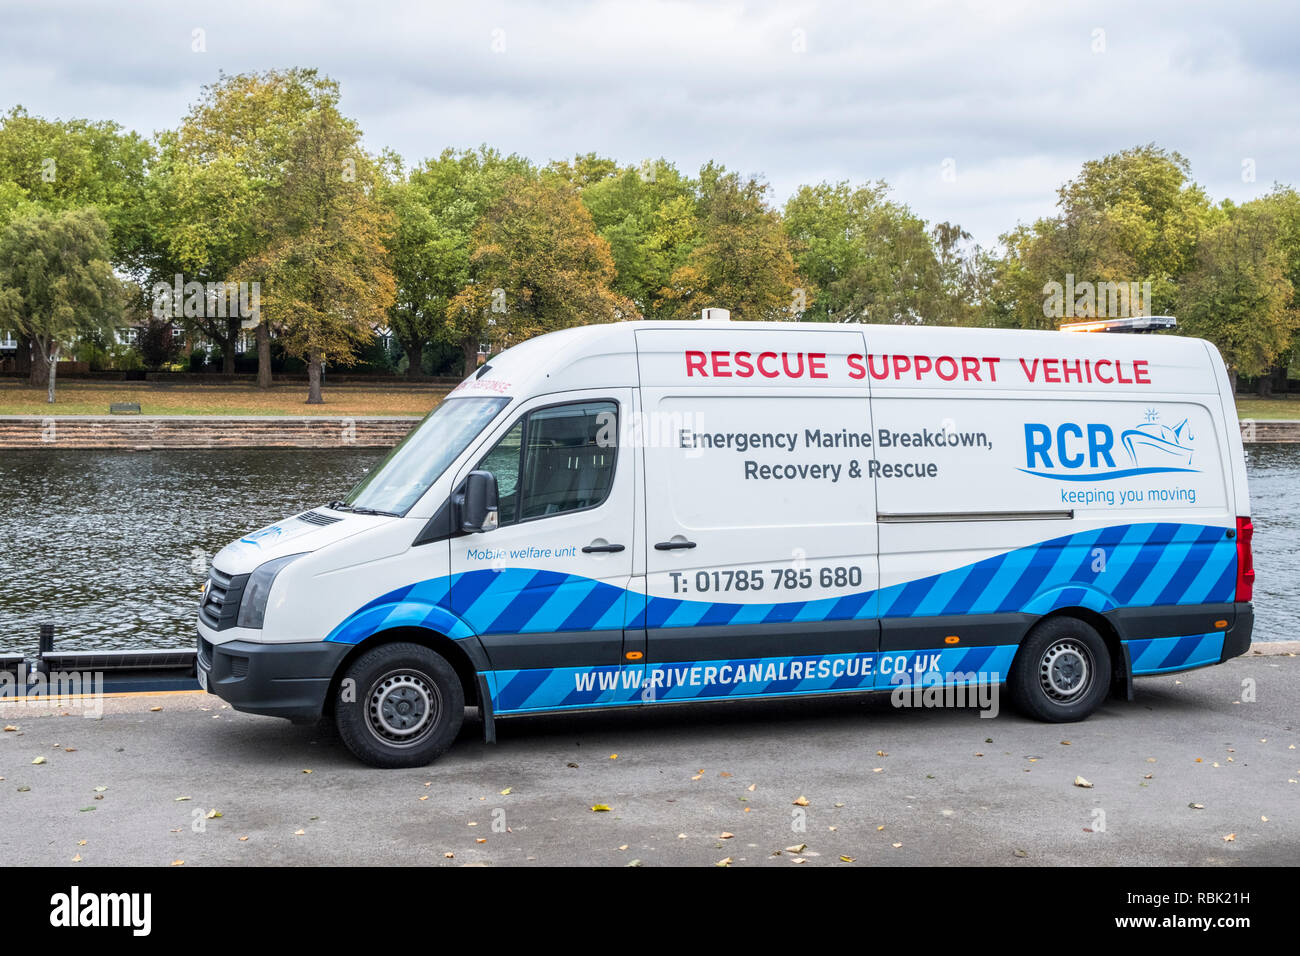 River Canal Rescue Support Vehicle for emergency marine recovery and rescue, River Trent, Nottinghamshire, England, UK Stock Photo